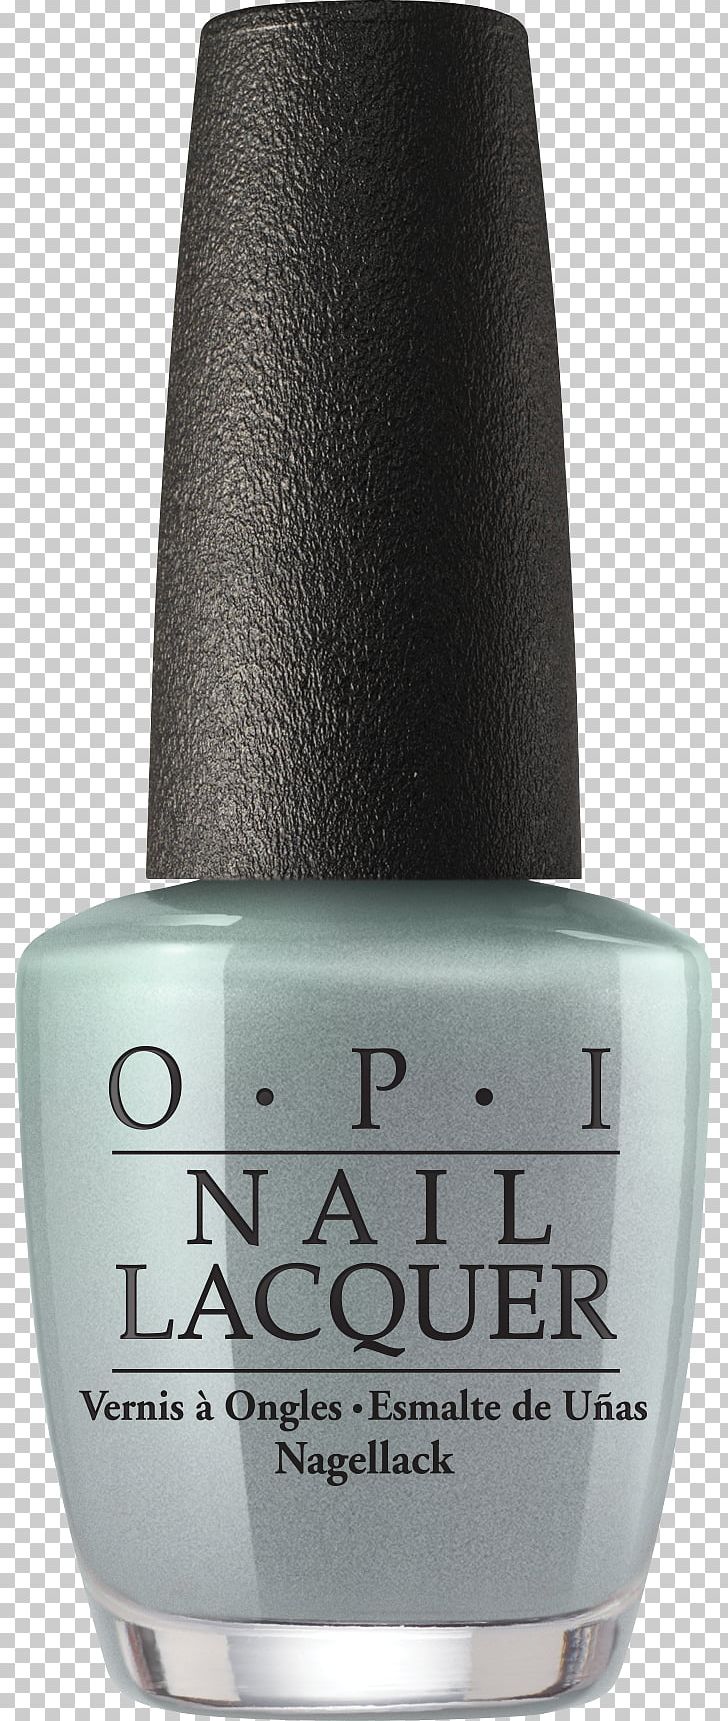 OPI Nail Lacquer OPI Products Nail Polish Cosmetics PNG, Clipart, Accessories, Beauty Parlour, Color, Cosmetics, Lacquer Free PNG Download